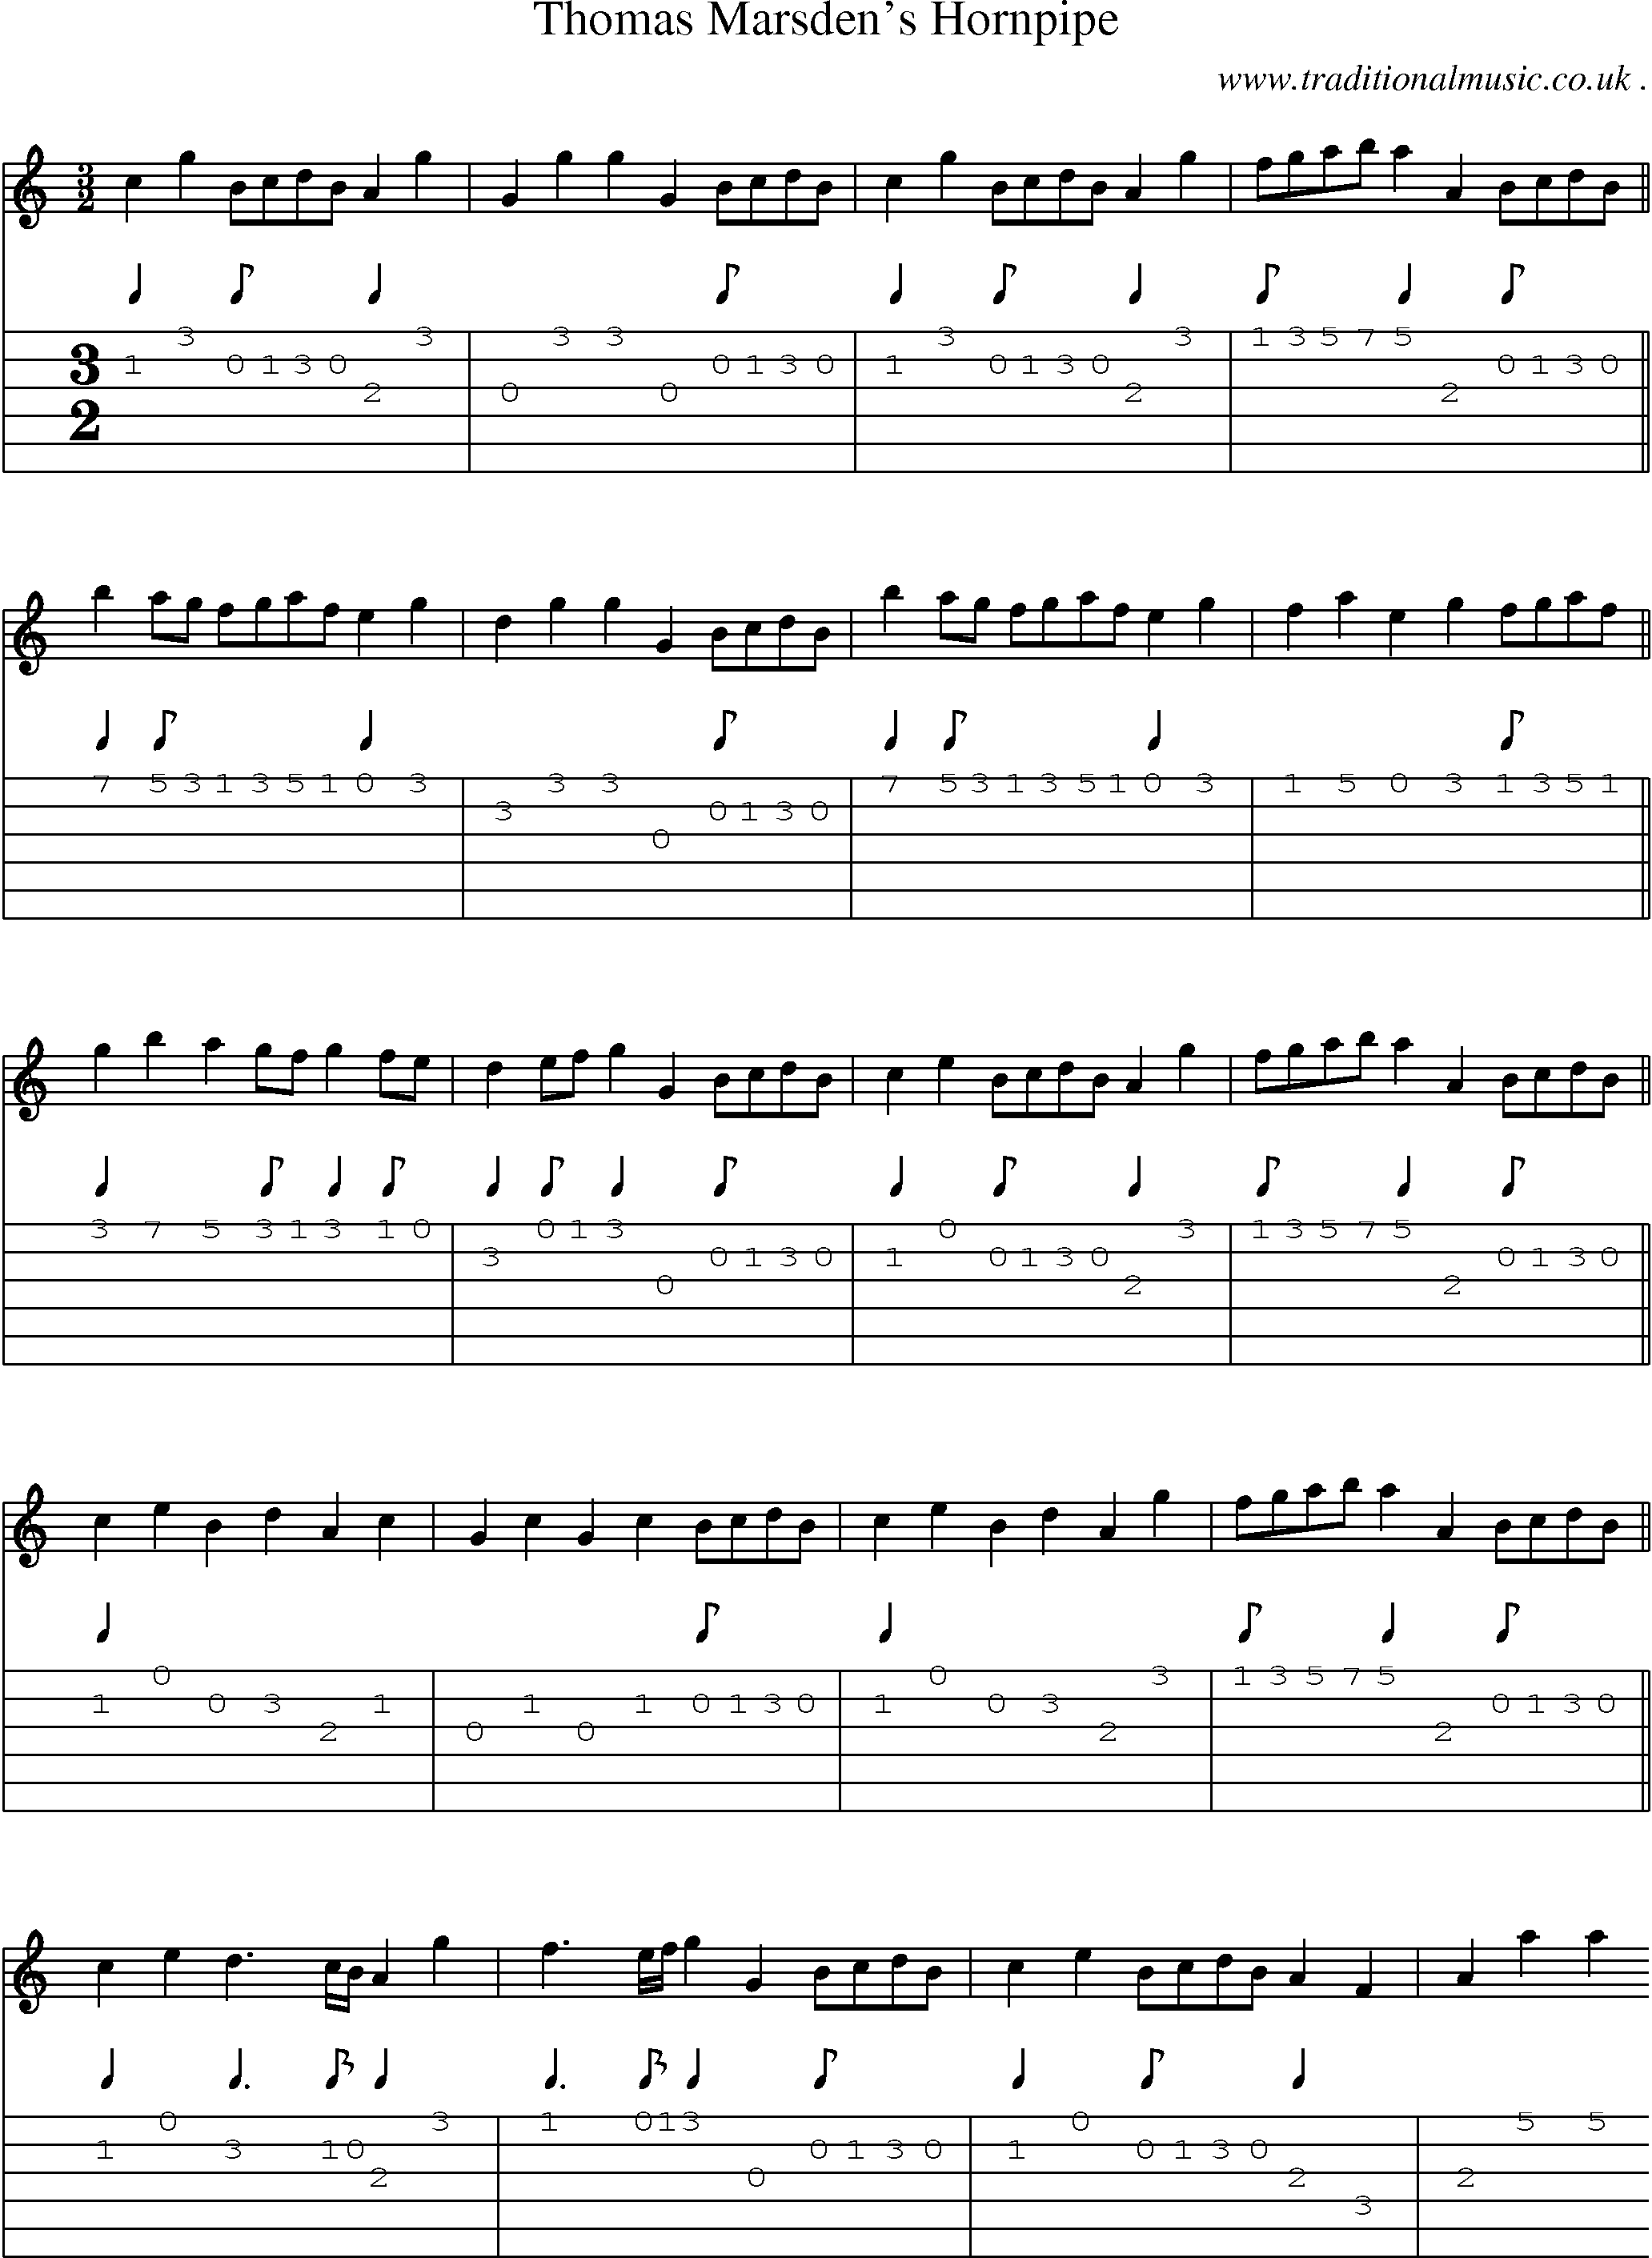 Sheet-Music and Guitar Tabs for Thomas Marsdens Hornpipe